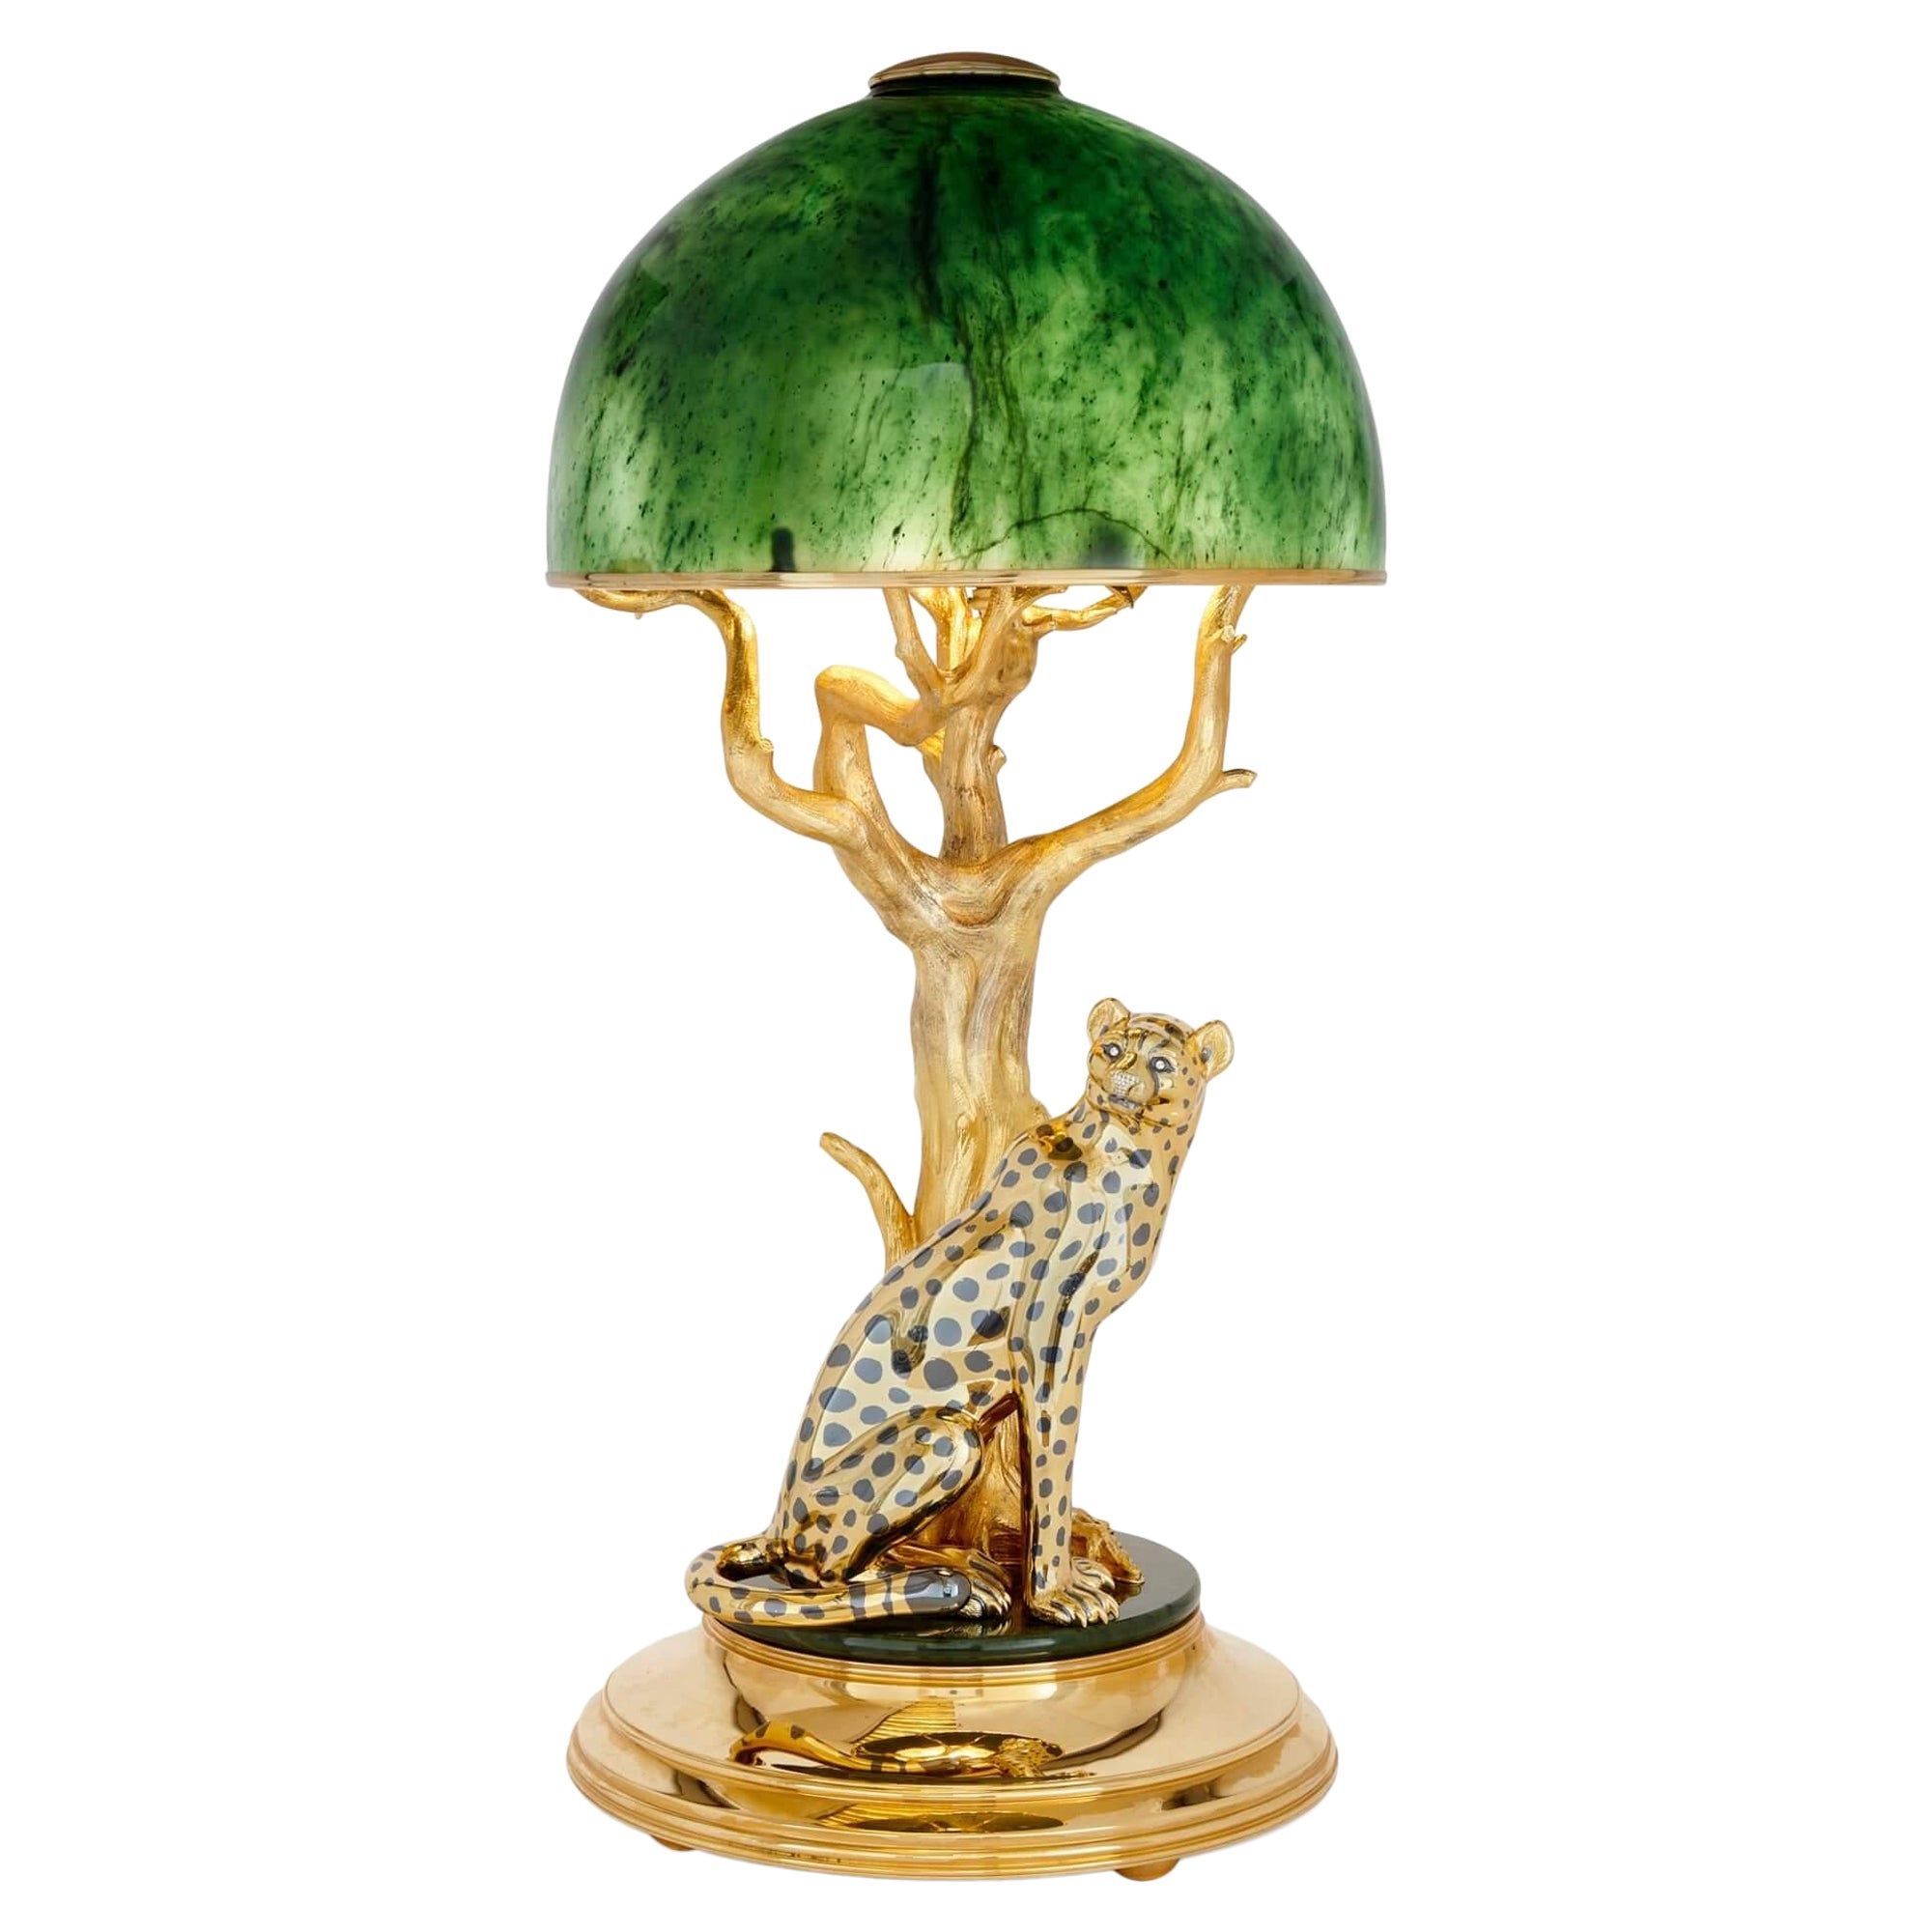 Nephrite, Diamond, Gilt Metal Lamp with a Cheetah by Asprey For Sale